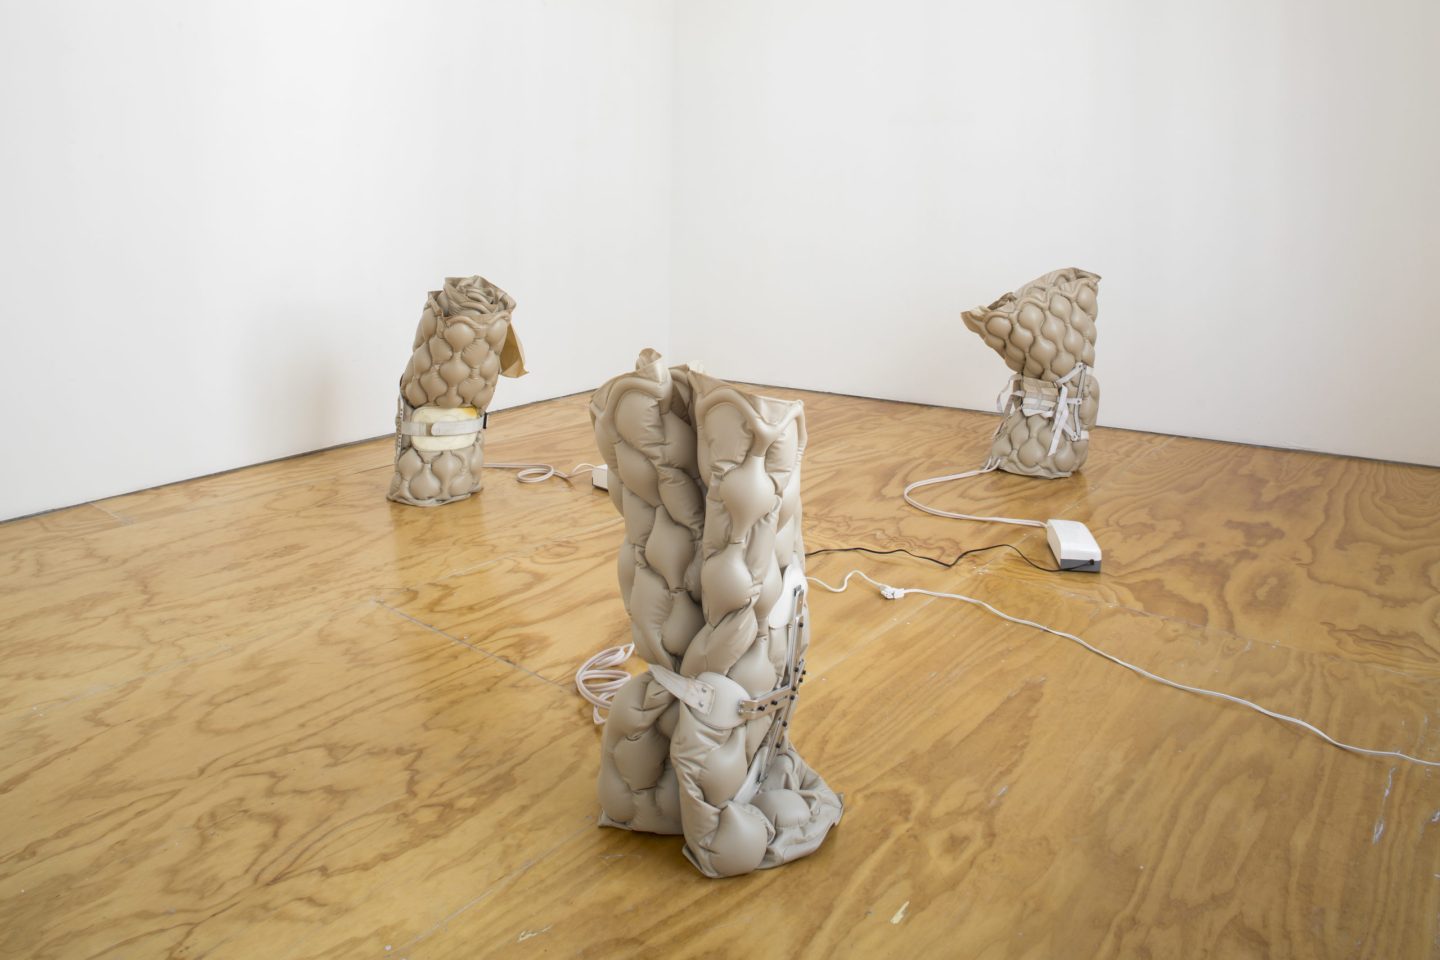 Three sculptures sit on the wood floor. They are made of lumpy white pressure pads encased in braces and are connected by cords.